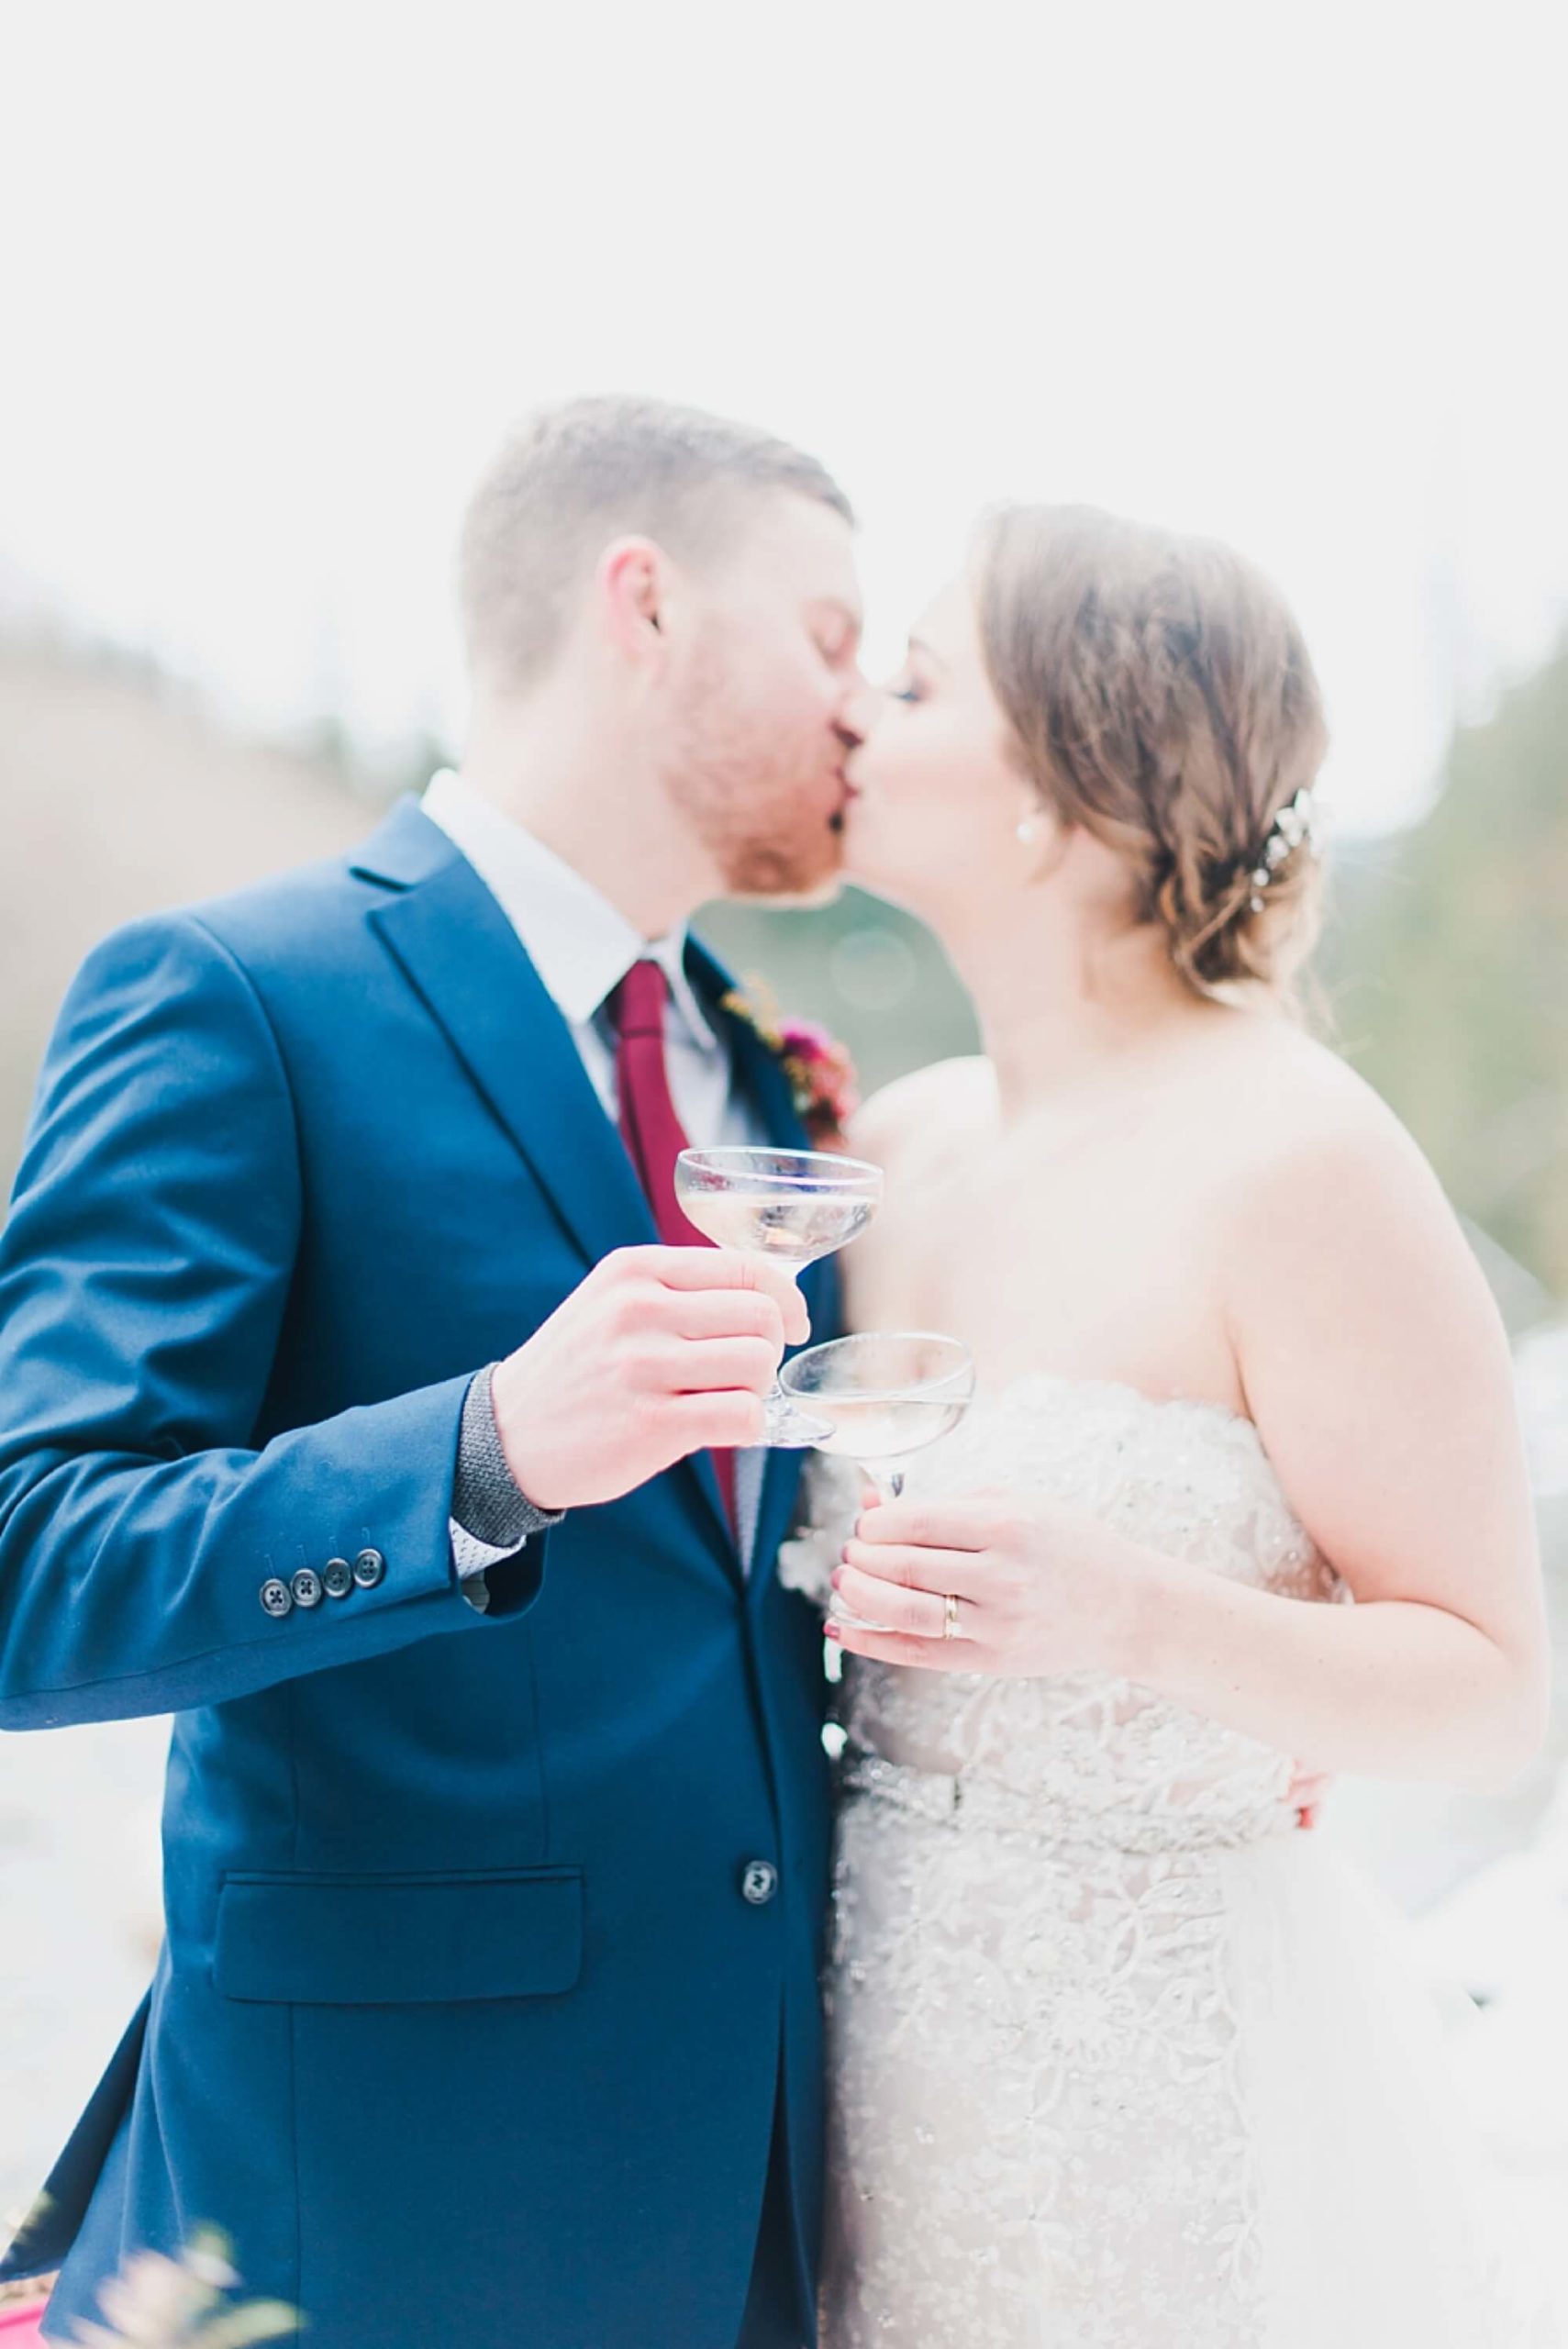 Seattle elopement at Snoqualmie Bride and Groom